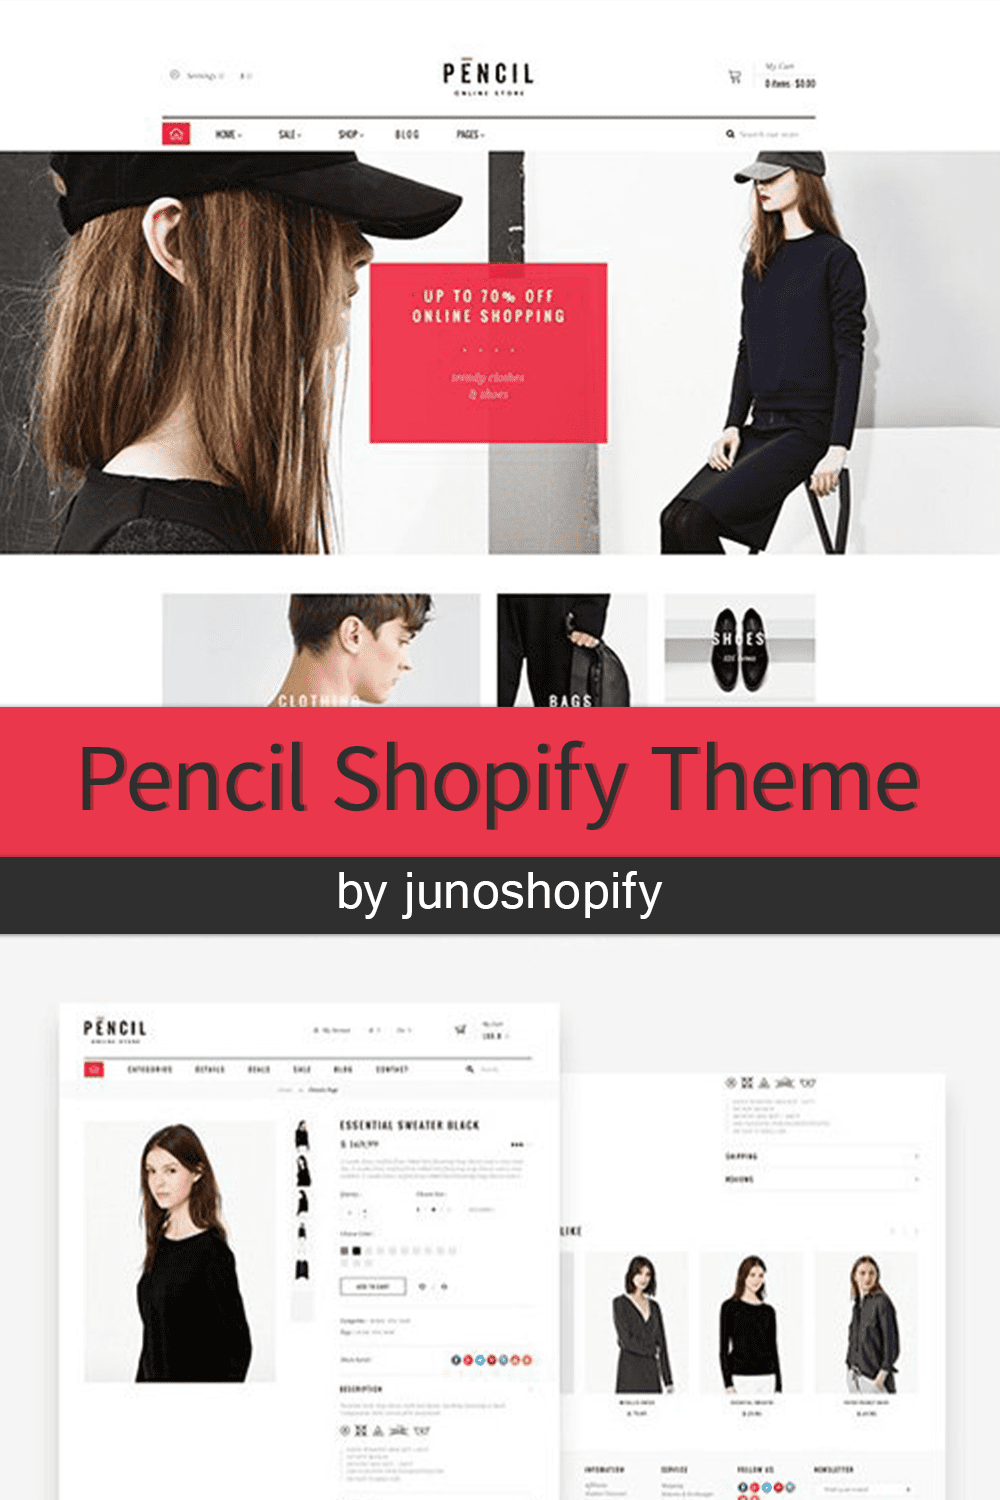 Essential sweater black on the Pencil Shopify Theme.